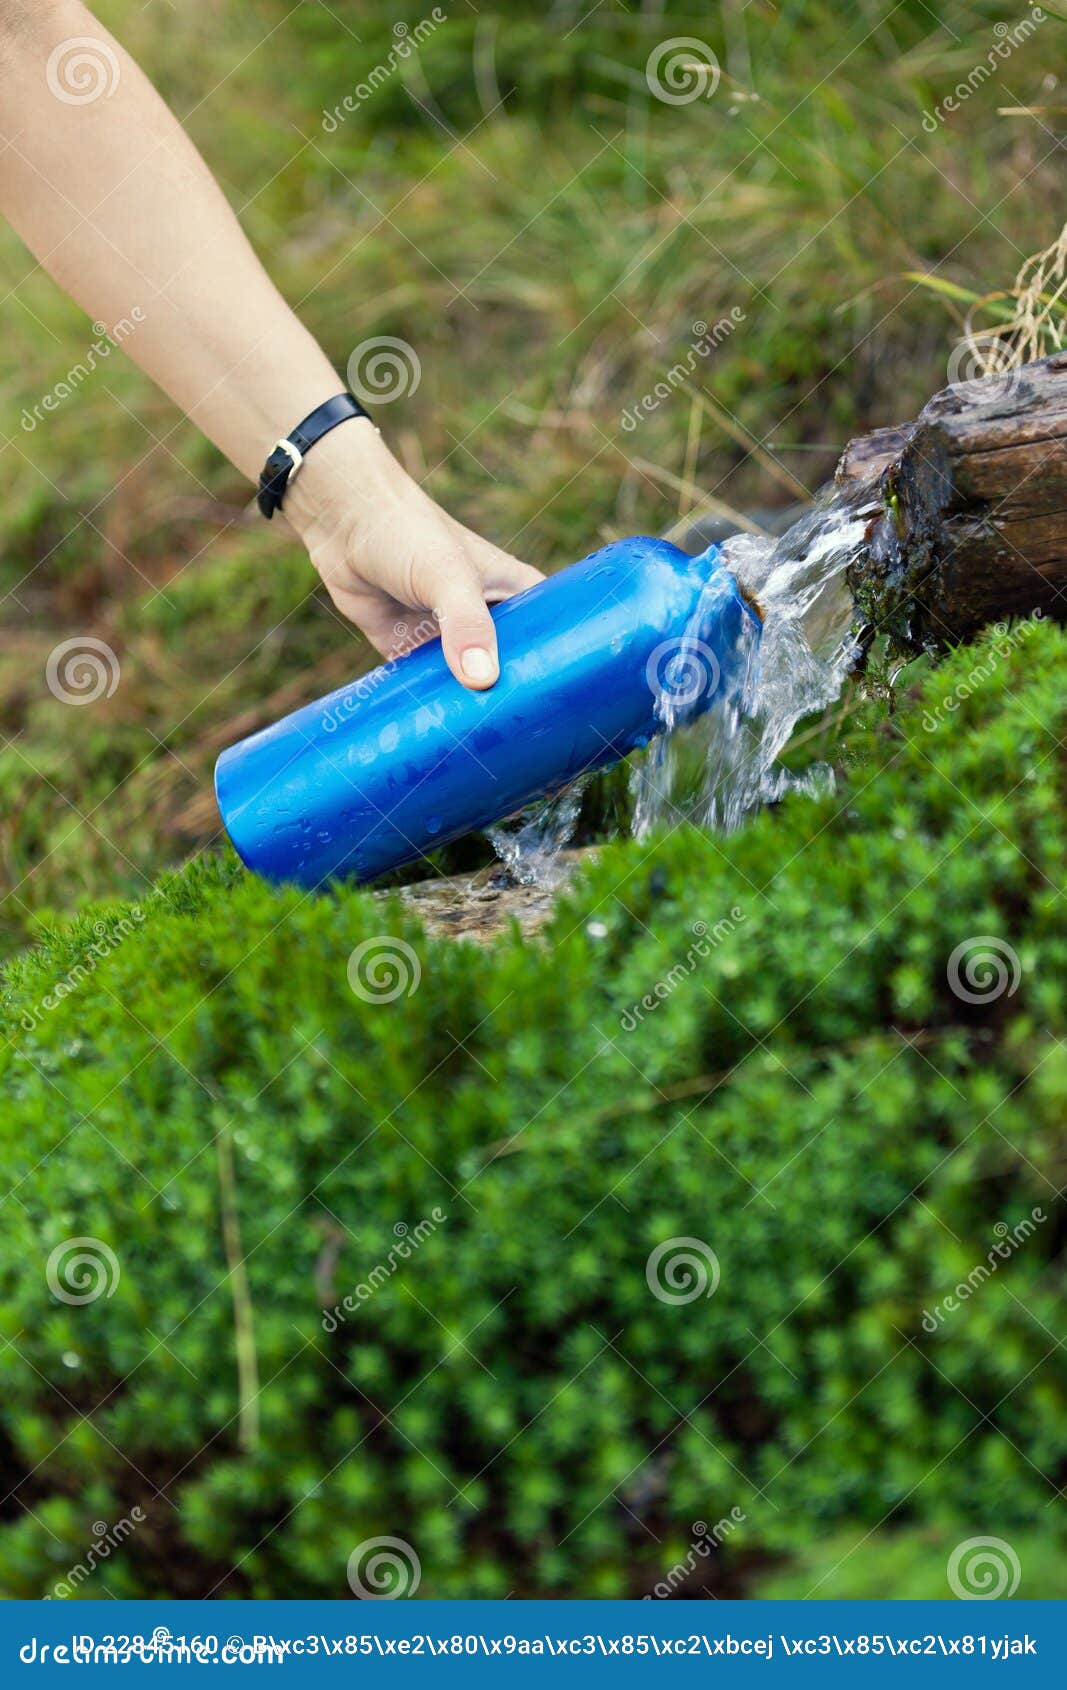 Water bottle and spring stock photo. Image of resource - 22845160